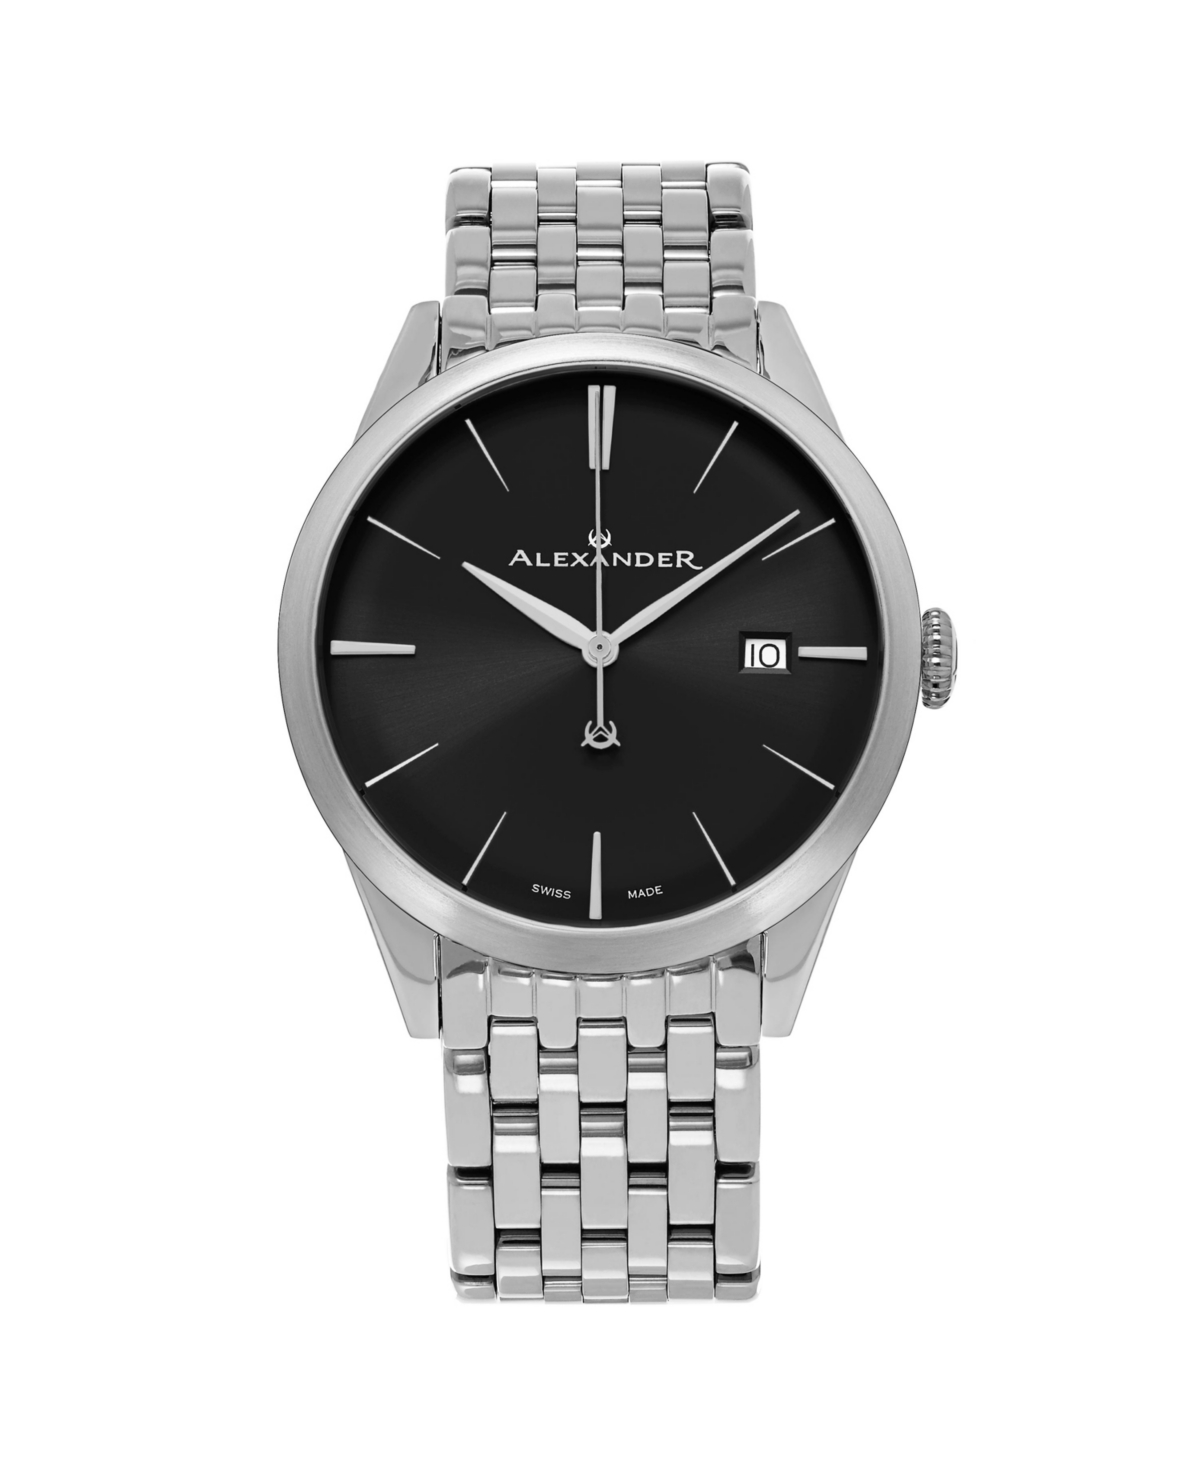 ALEXANDER MEN'S SOPHISTICATE SILVER-TONE STAINLESS STEEL , BLACK DIAL , 40MM ROUND WATCH